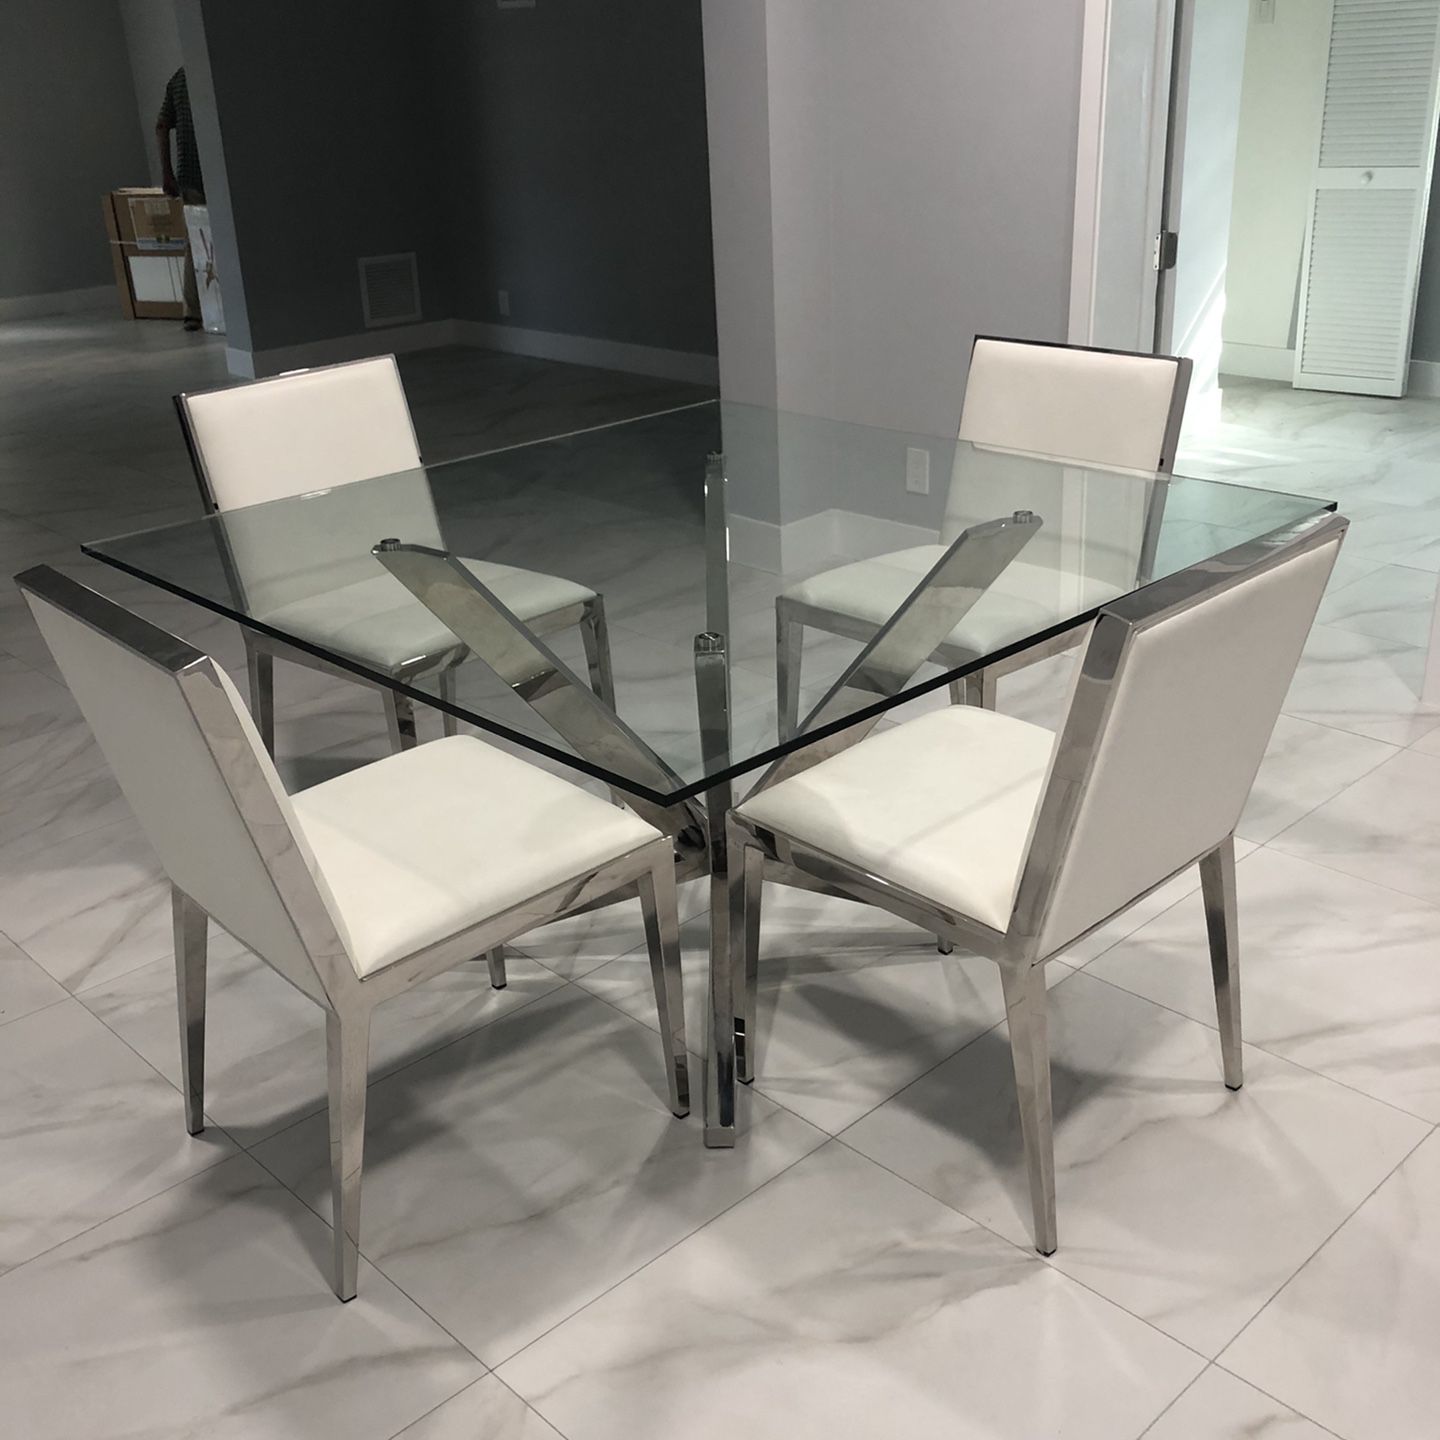 El Dorado Dining Table And Chairs